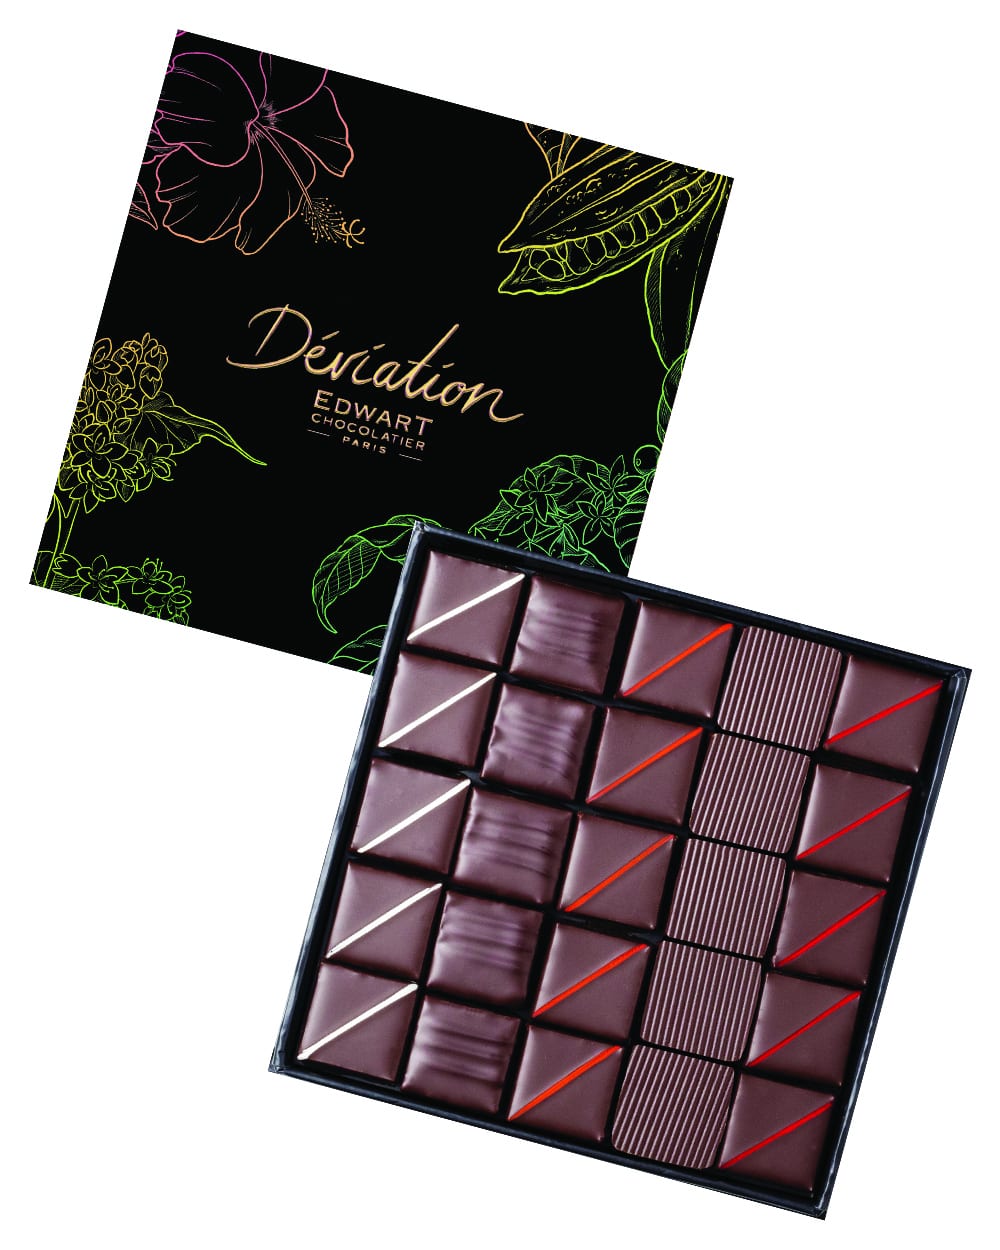 The first vegan selection from Edwart Chocolatier. — AFP-Relaxnews pic